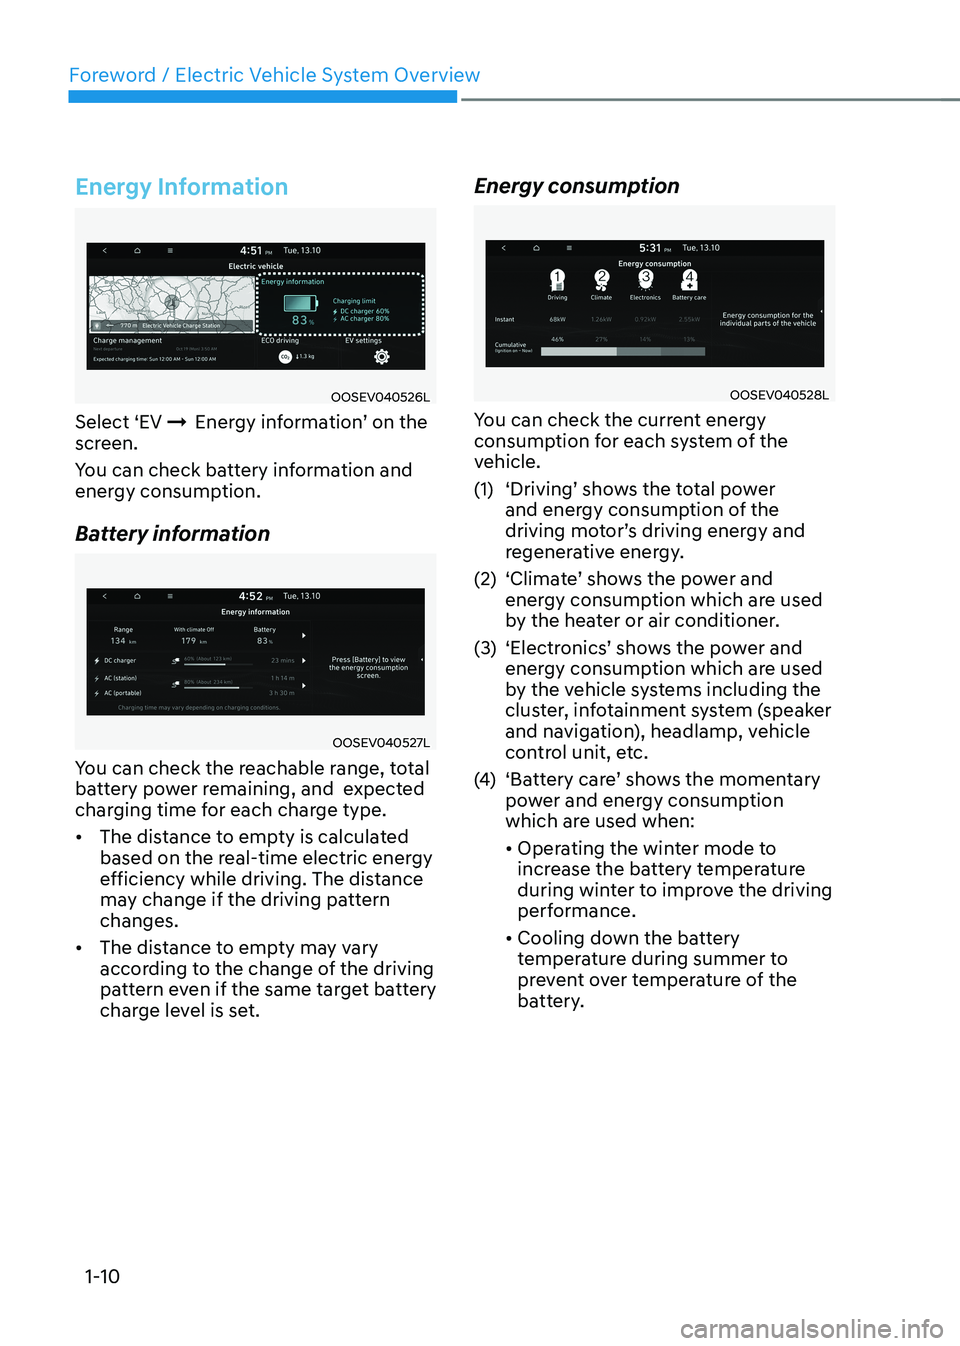 HYUNDAI KONA EV 2023  Owners Manual Foreword / Electric Vehicle System Overview
1-10
Energy Information
OOSEV040526L
Select ‘EV  ÞEnergy information’ on the 
screen. 
You can check battery information and  
energy consumption. 
Bat